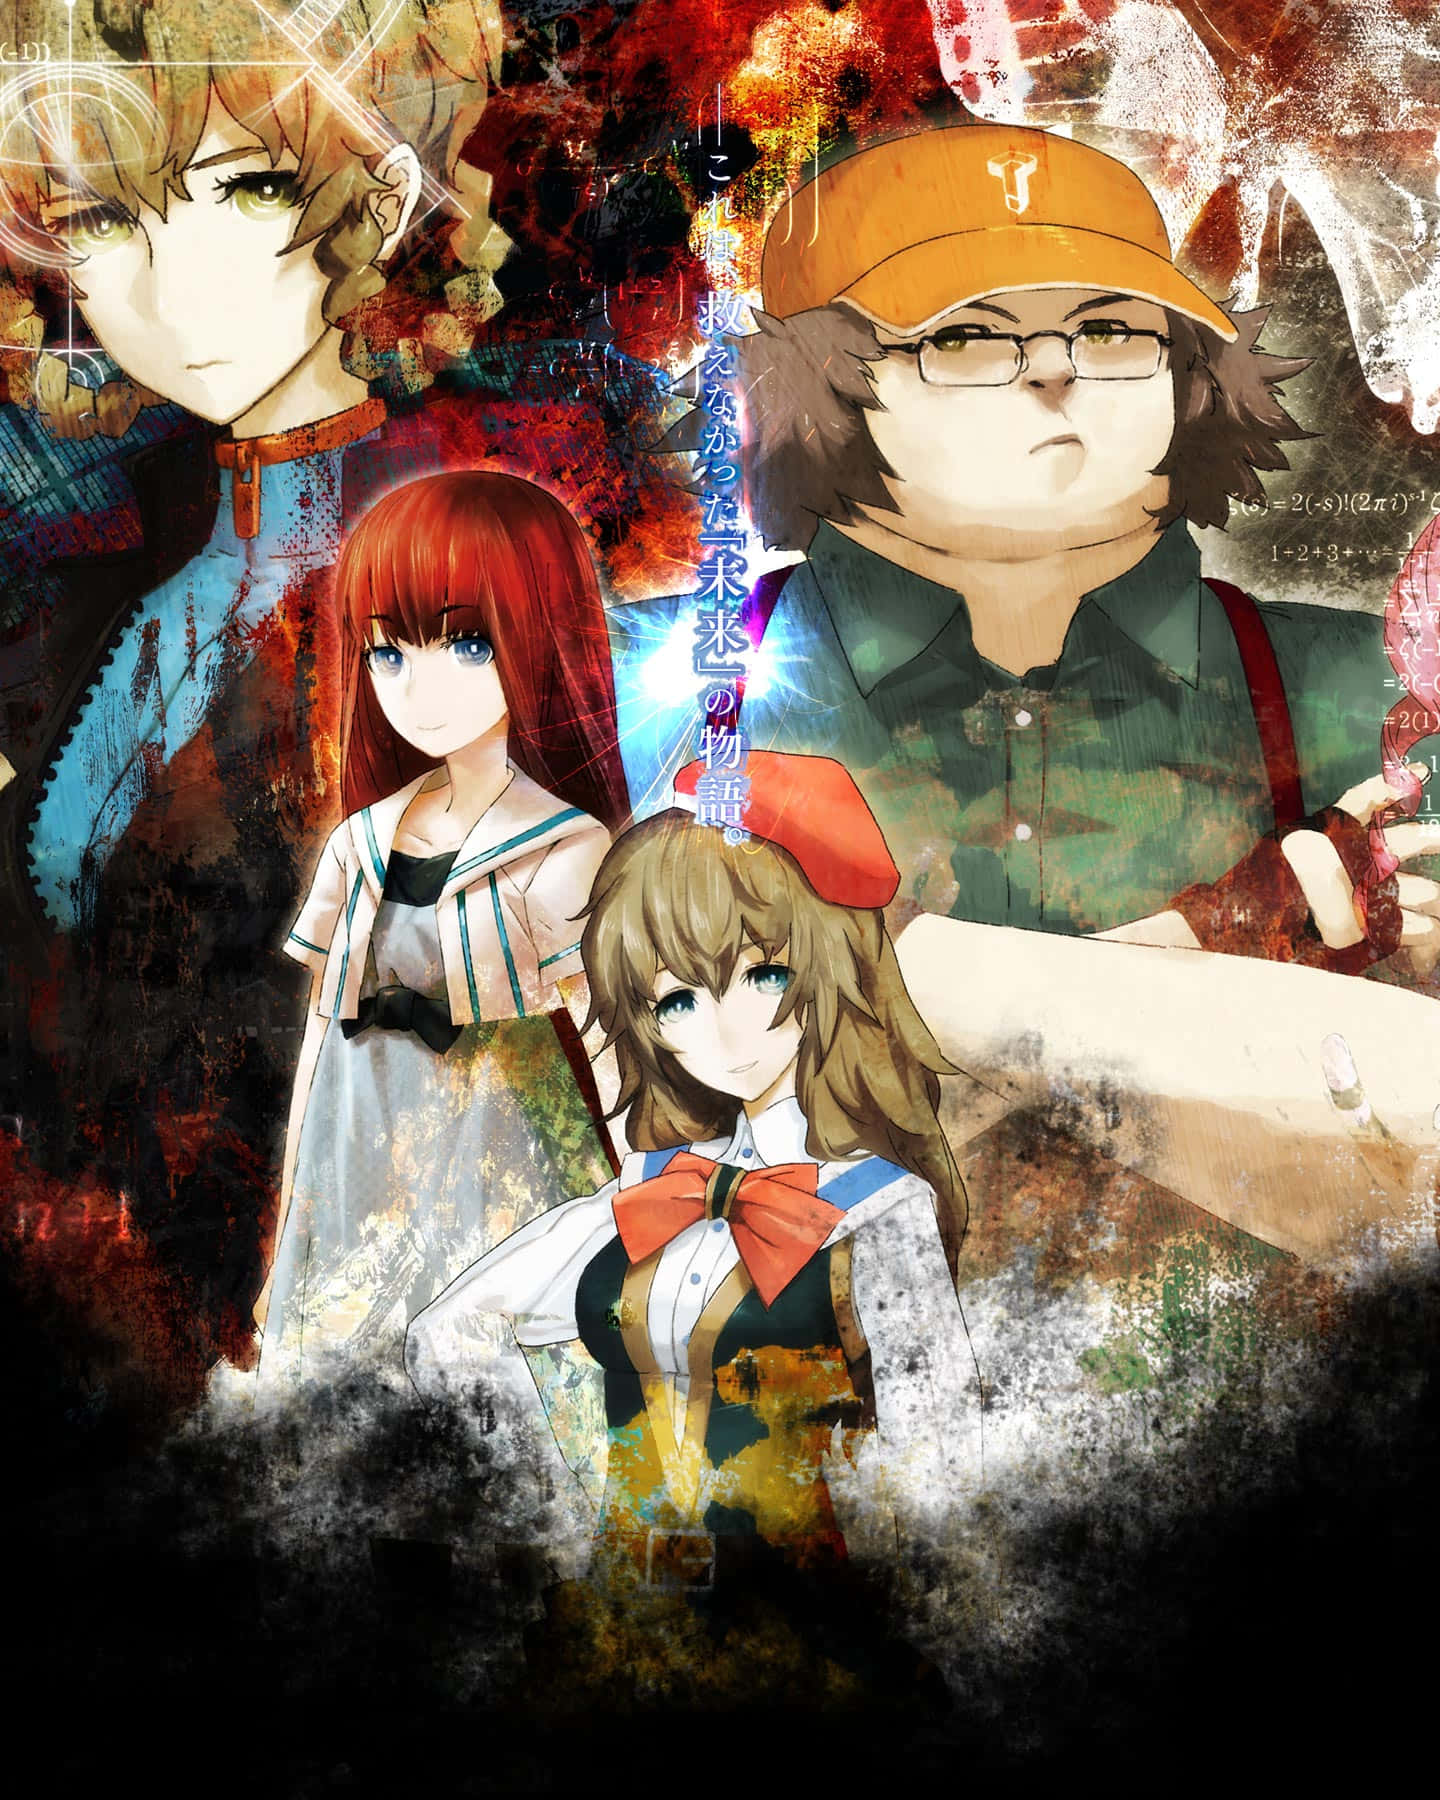 Enjoy the everyday life adventures with Steins Gate